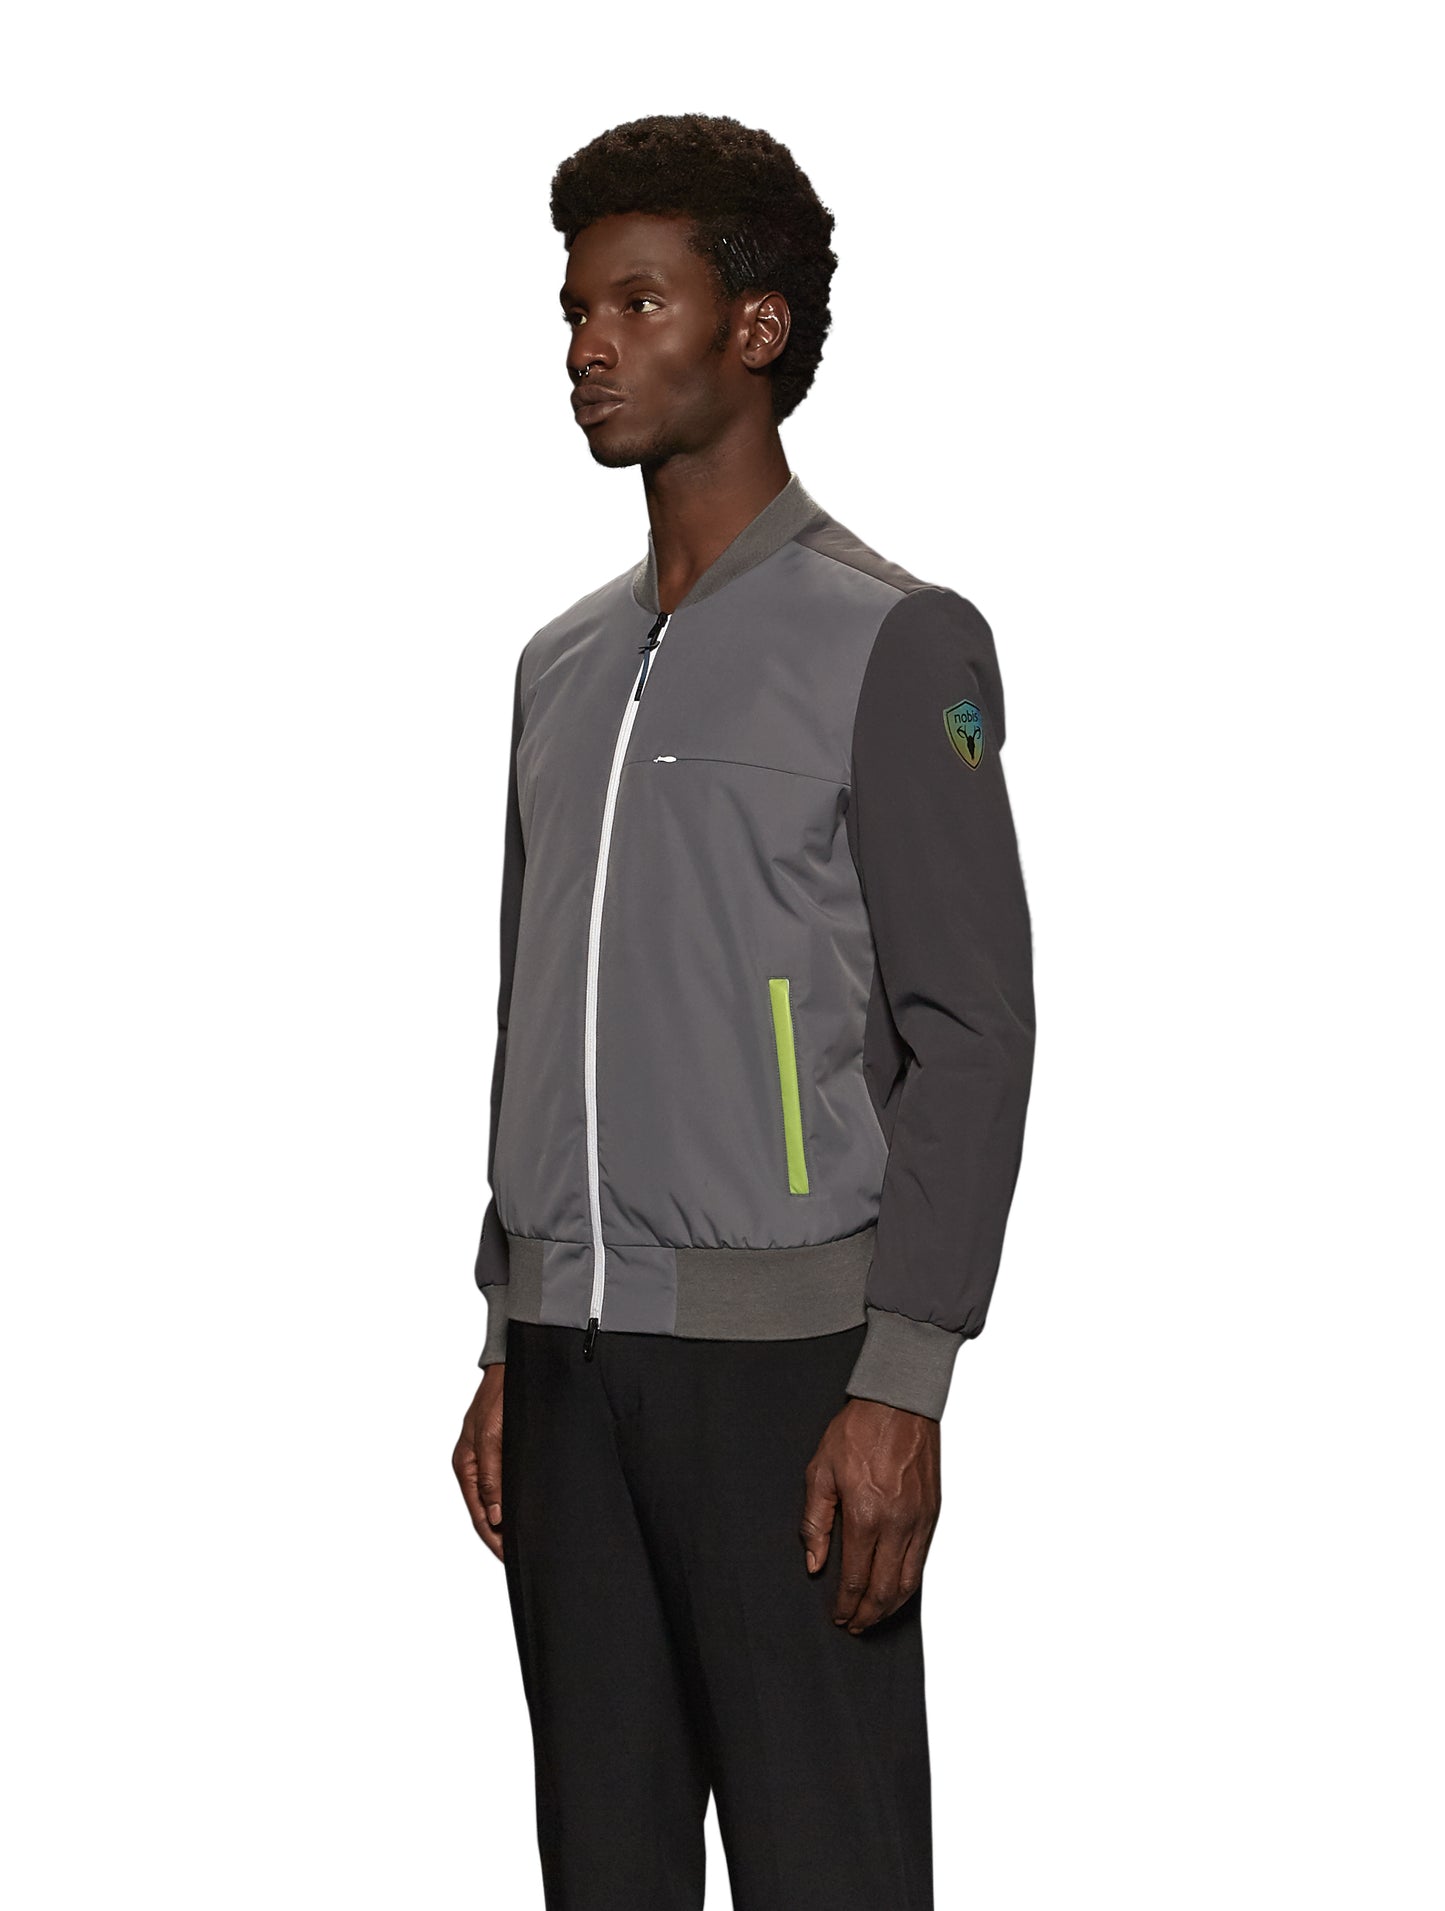 Unisex hip length bomber jacket with a contrast colour back panel, and zipper pockets at waist and an invisible zipper pocket at chest, in Concrete/Steel Grey